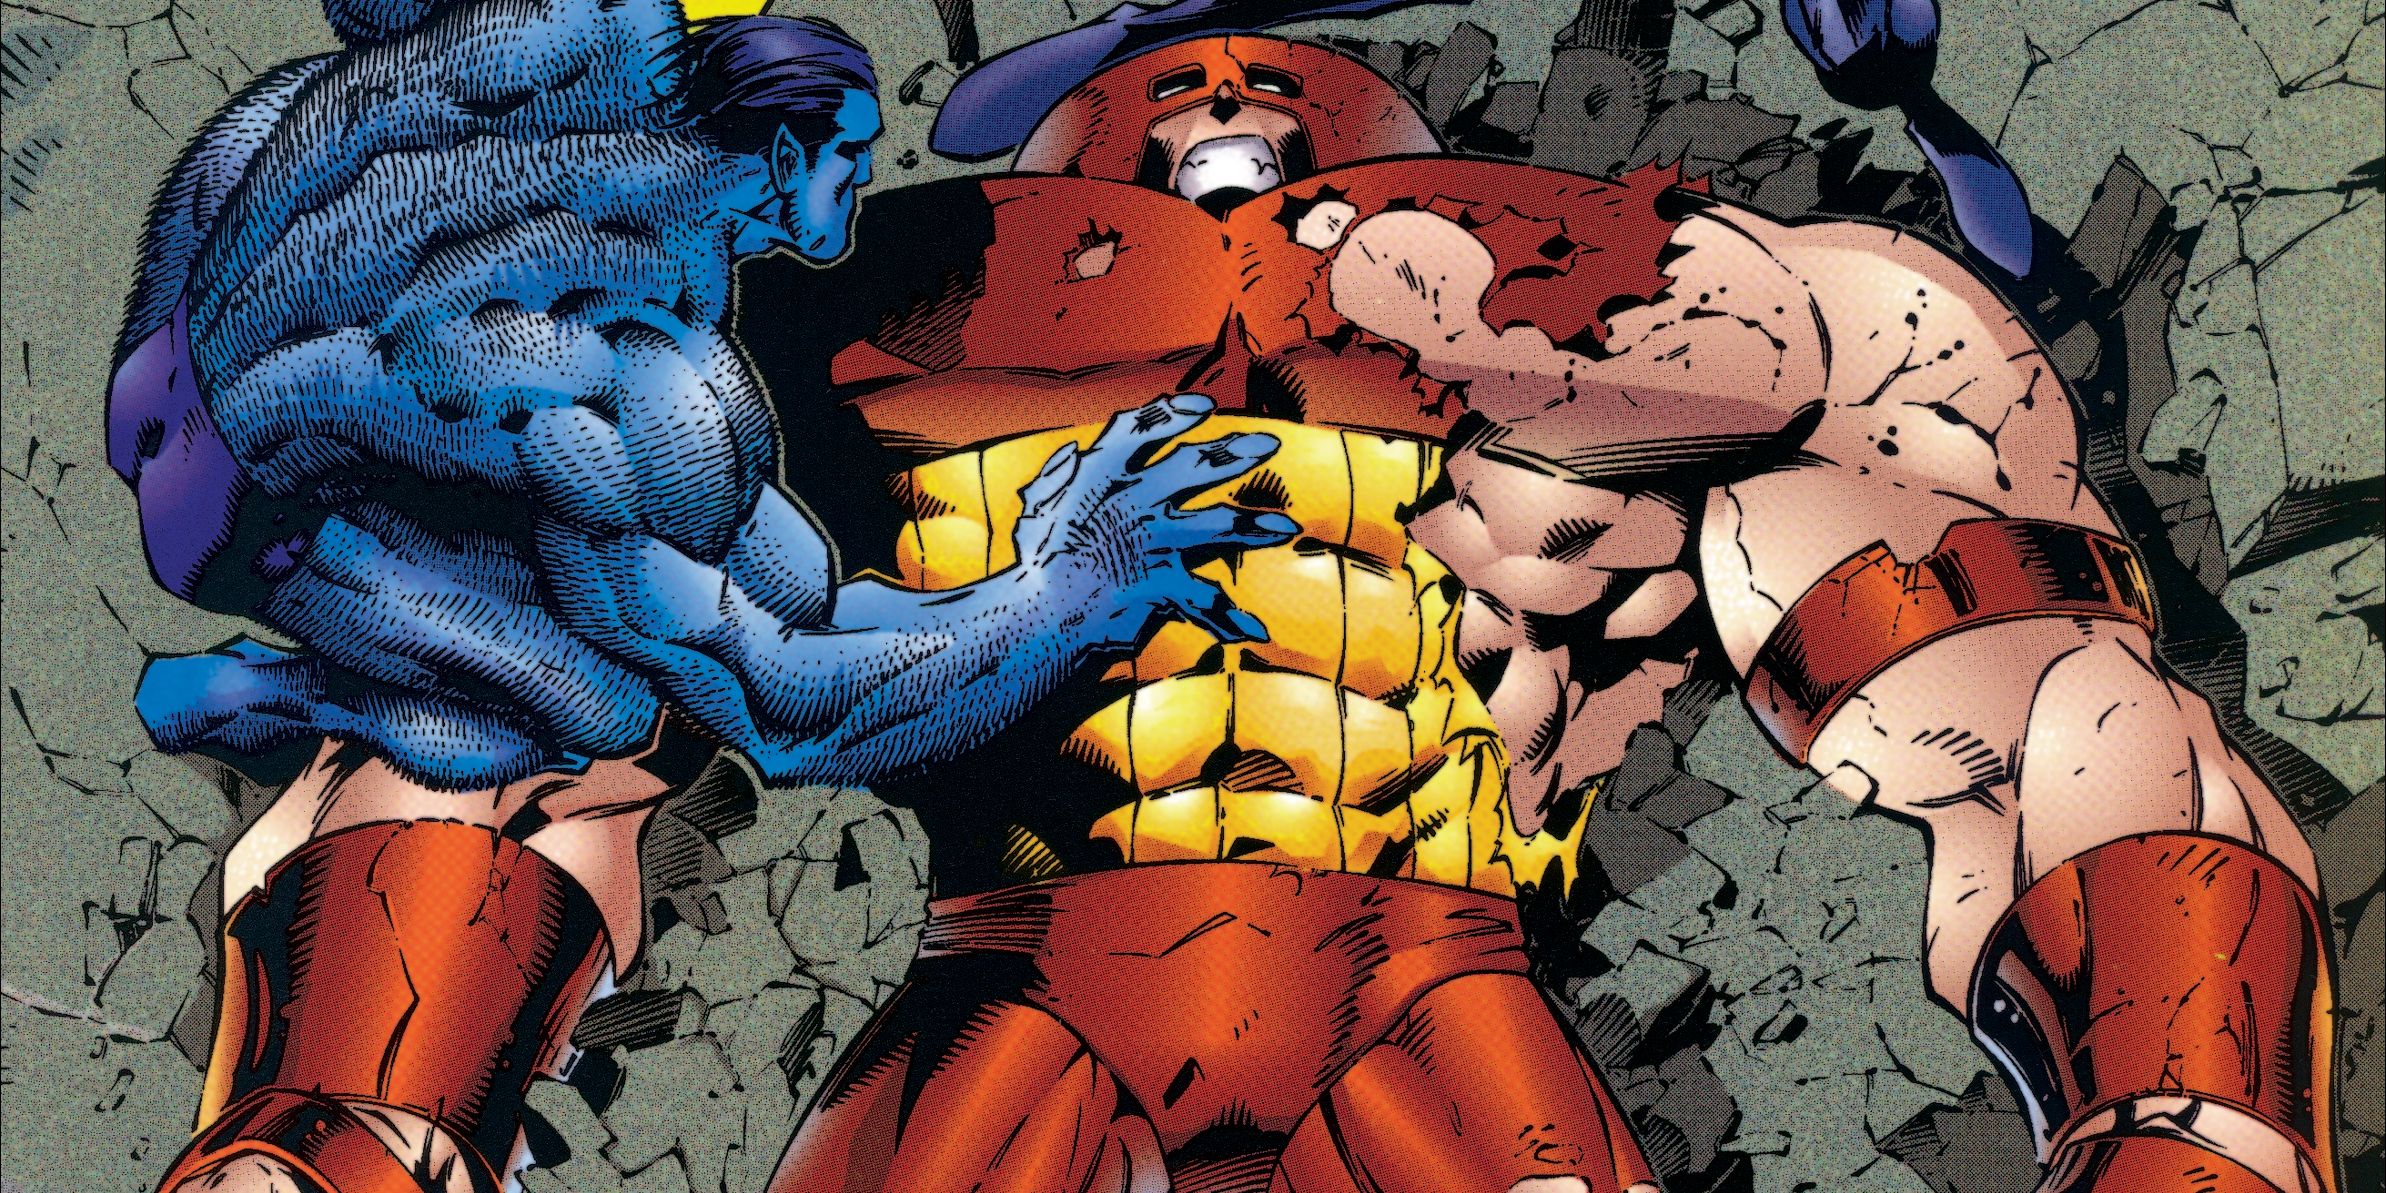 The Juggernaut on the cropped cover to Uncanny X-Men #322